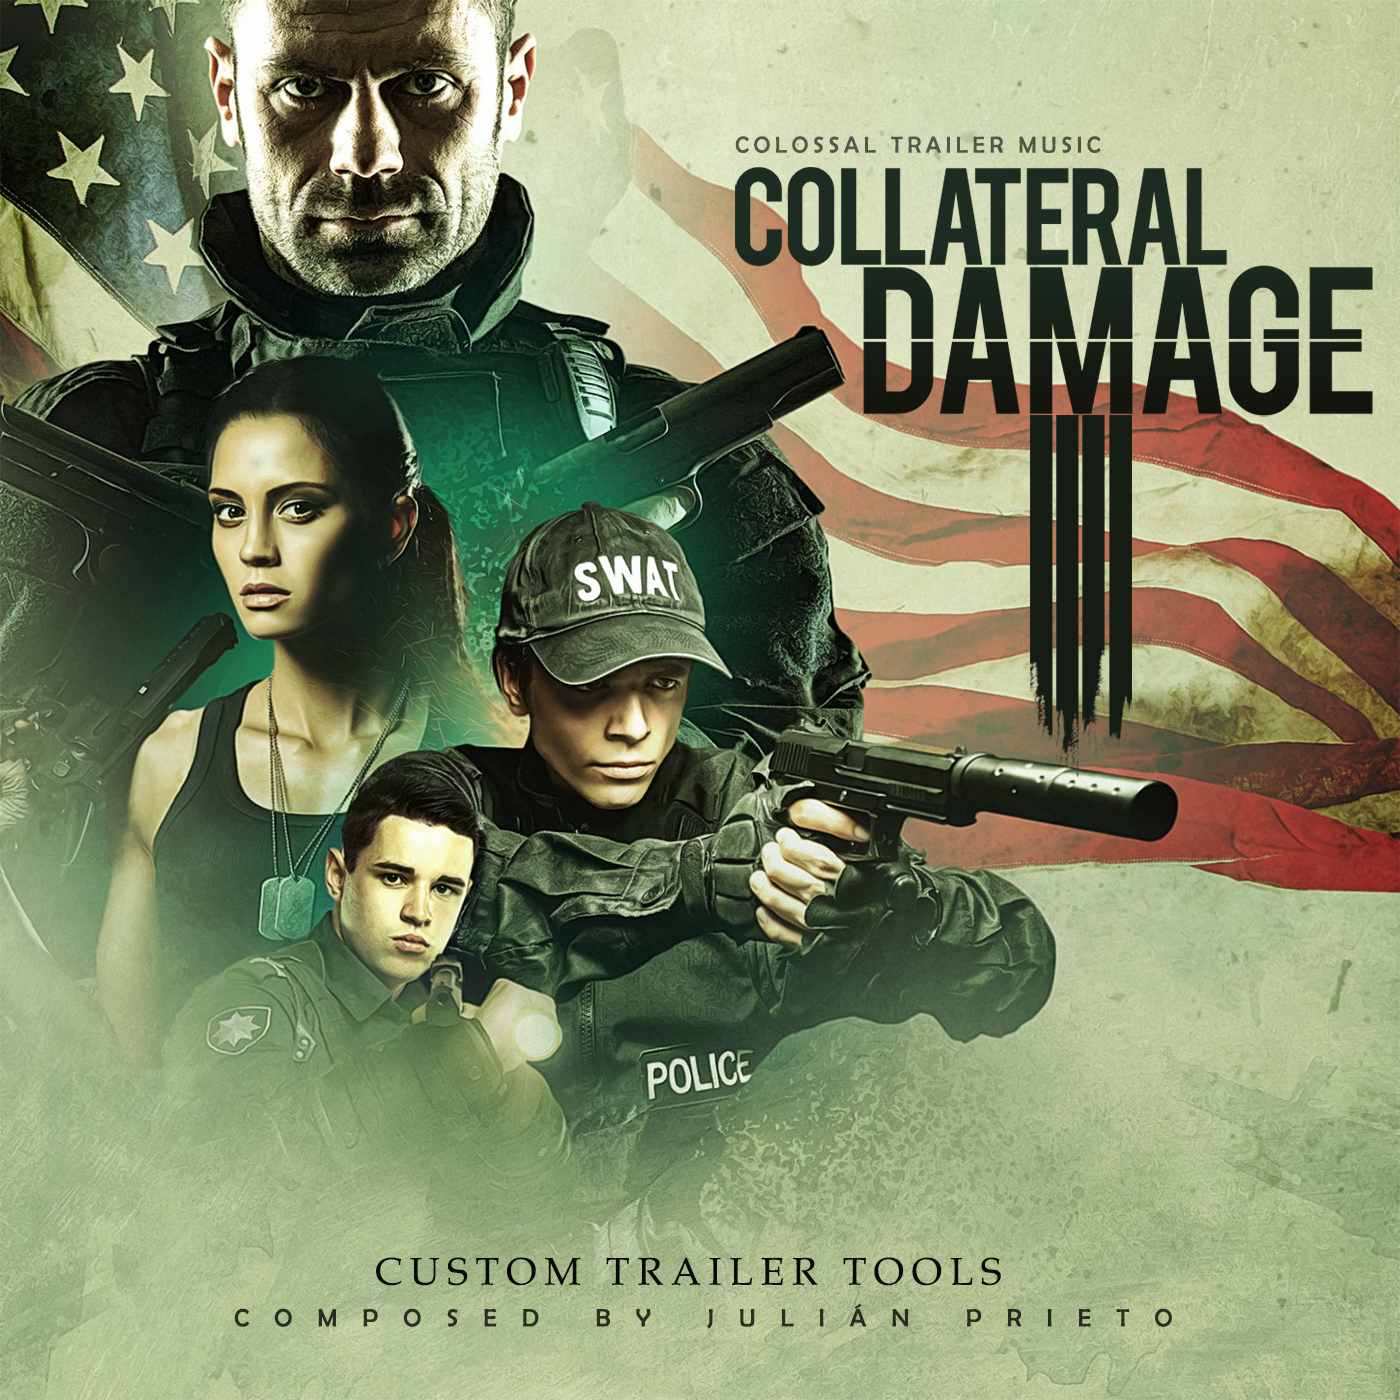 ctm067-collateral-damage-4-hd